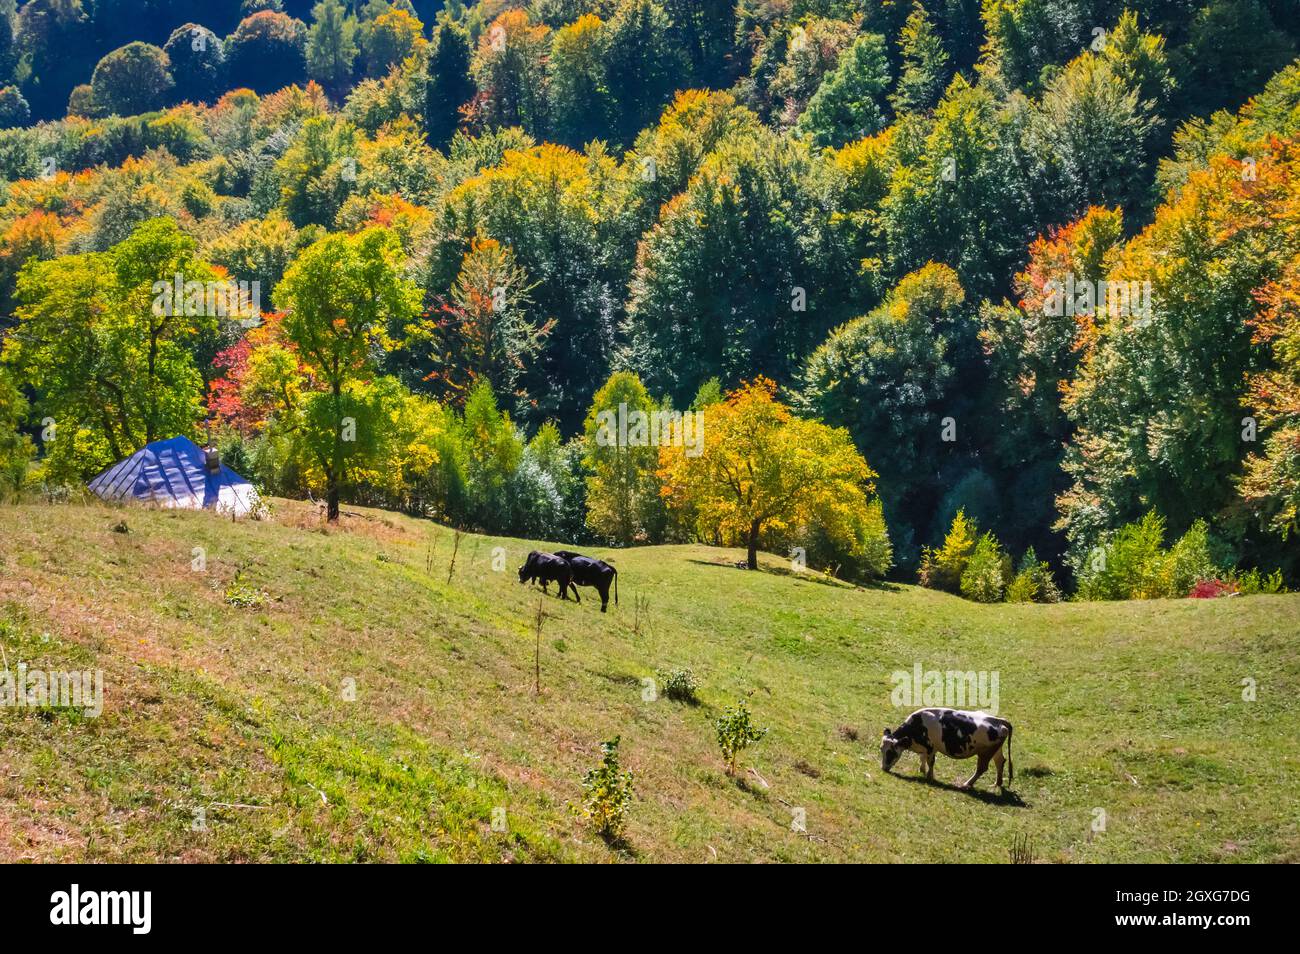 Buila Vanturarita National Park, Romania. Some cows on a meadow in autumn with a colorful forest the background. Stock Photo